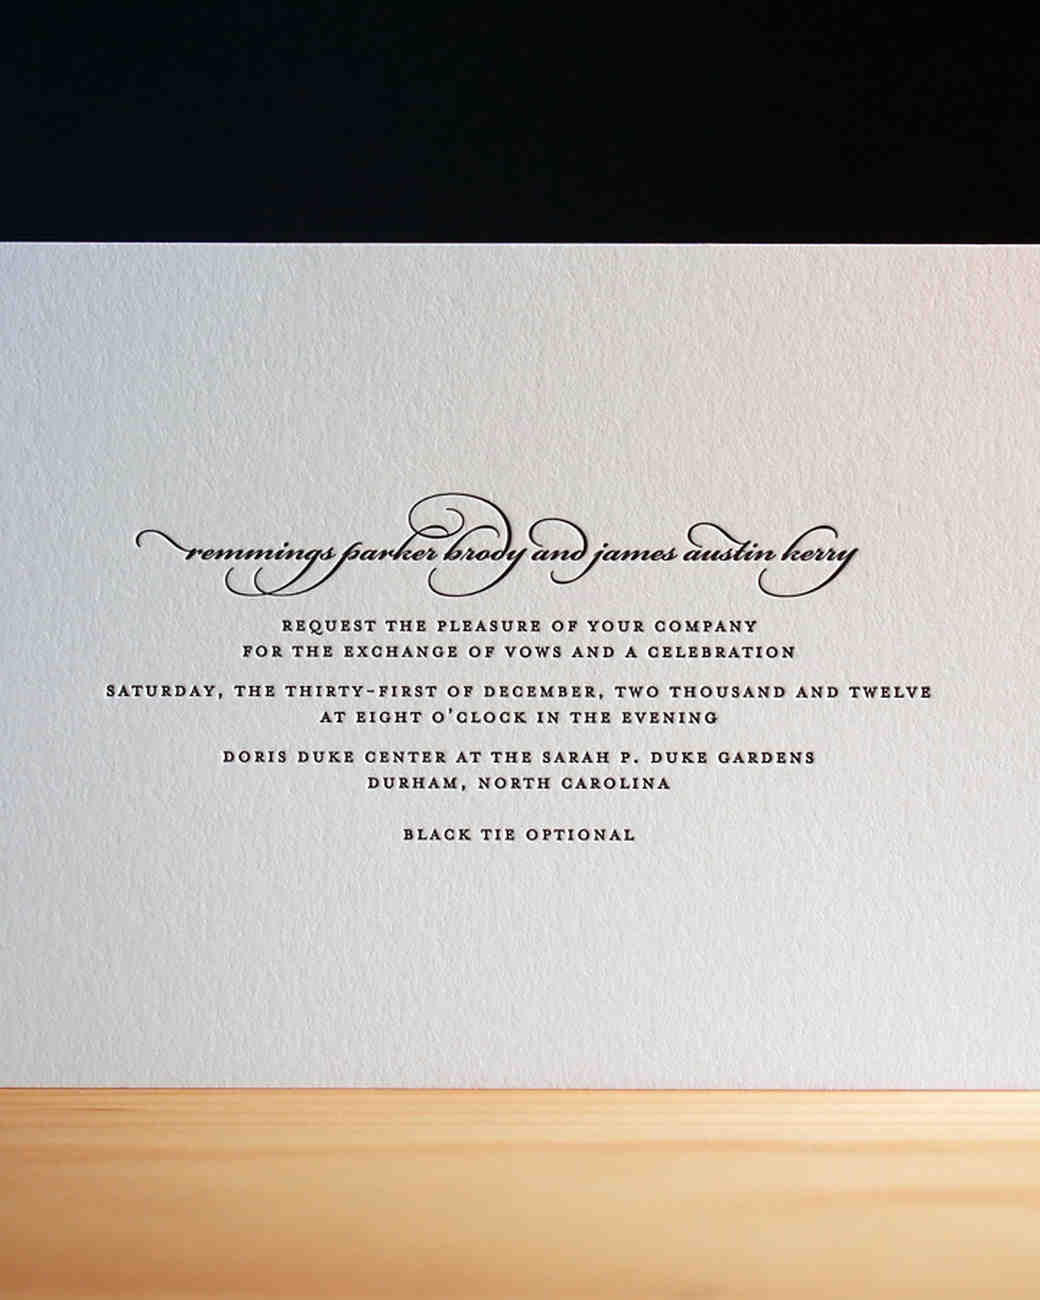 Classic Wedding Invitations for Traditional Brides and Grooms | Martha